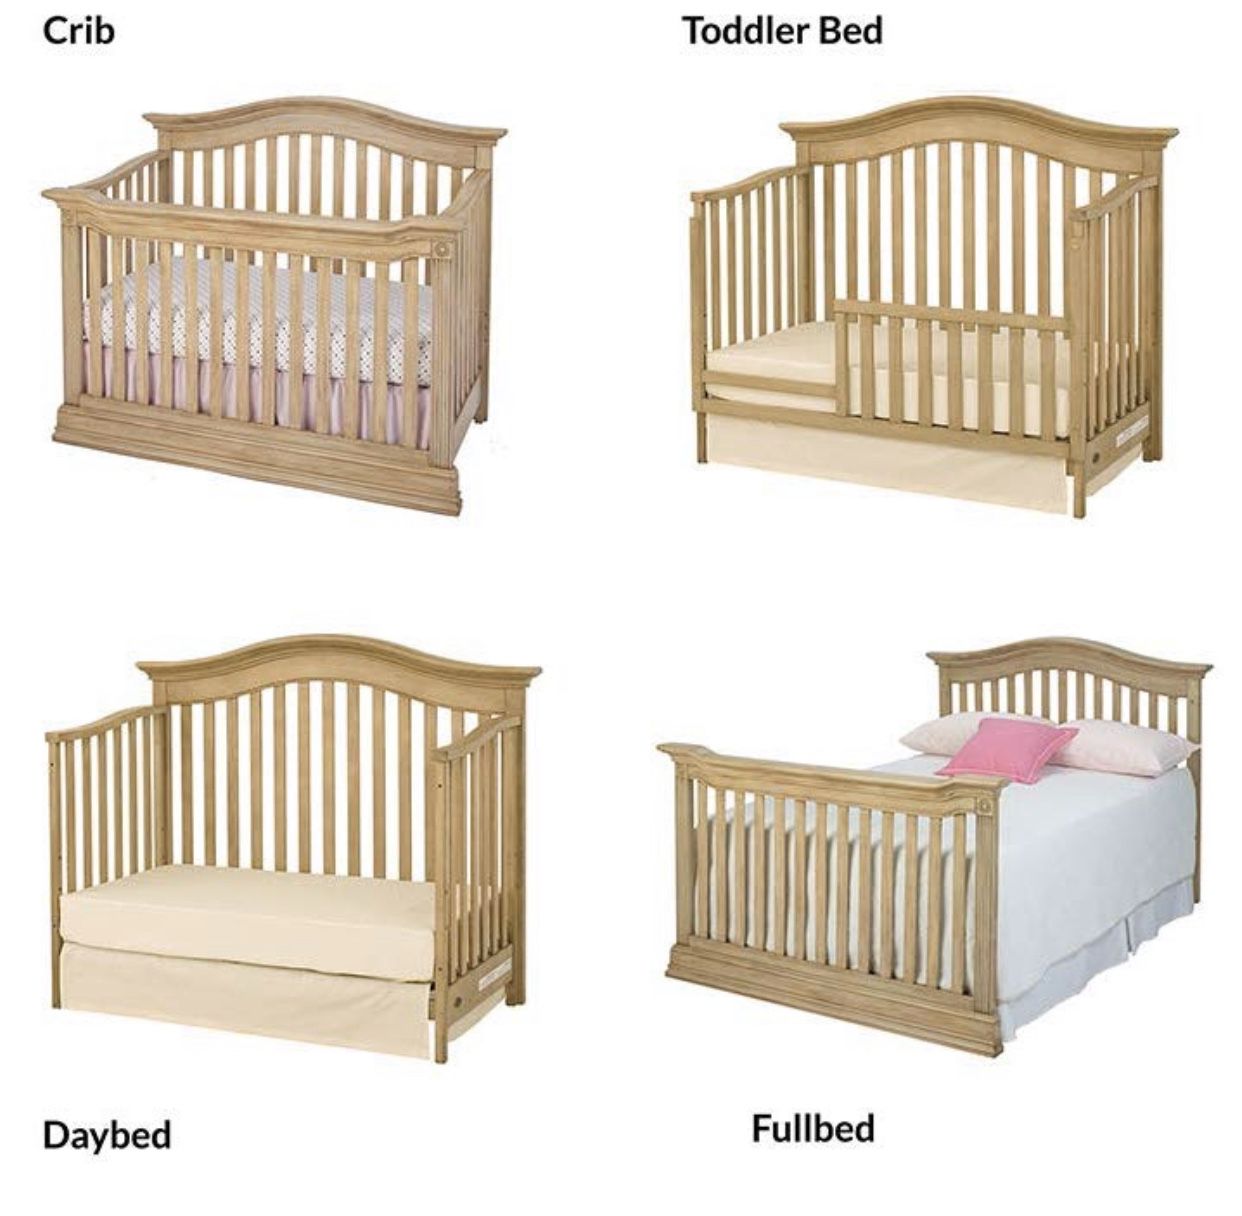 Baby Cache Montana Crib, Toddler Bed and Big Kid Bed